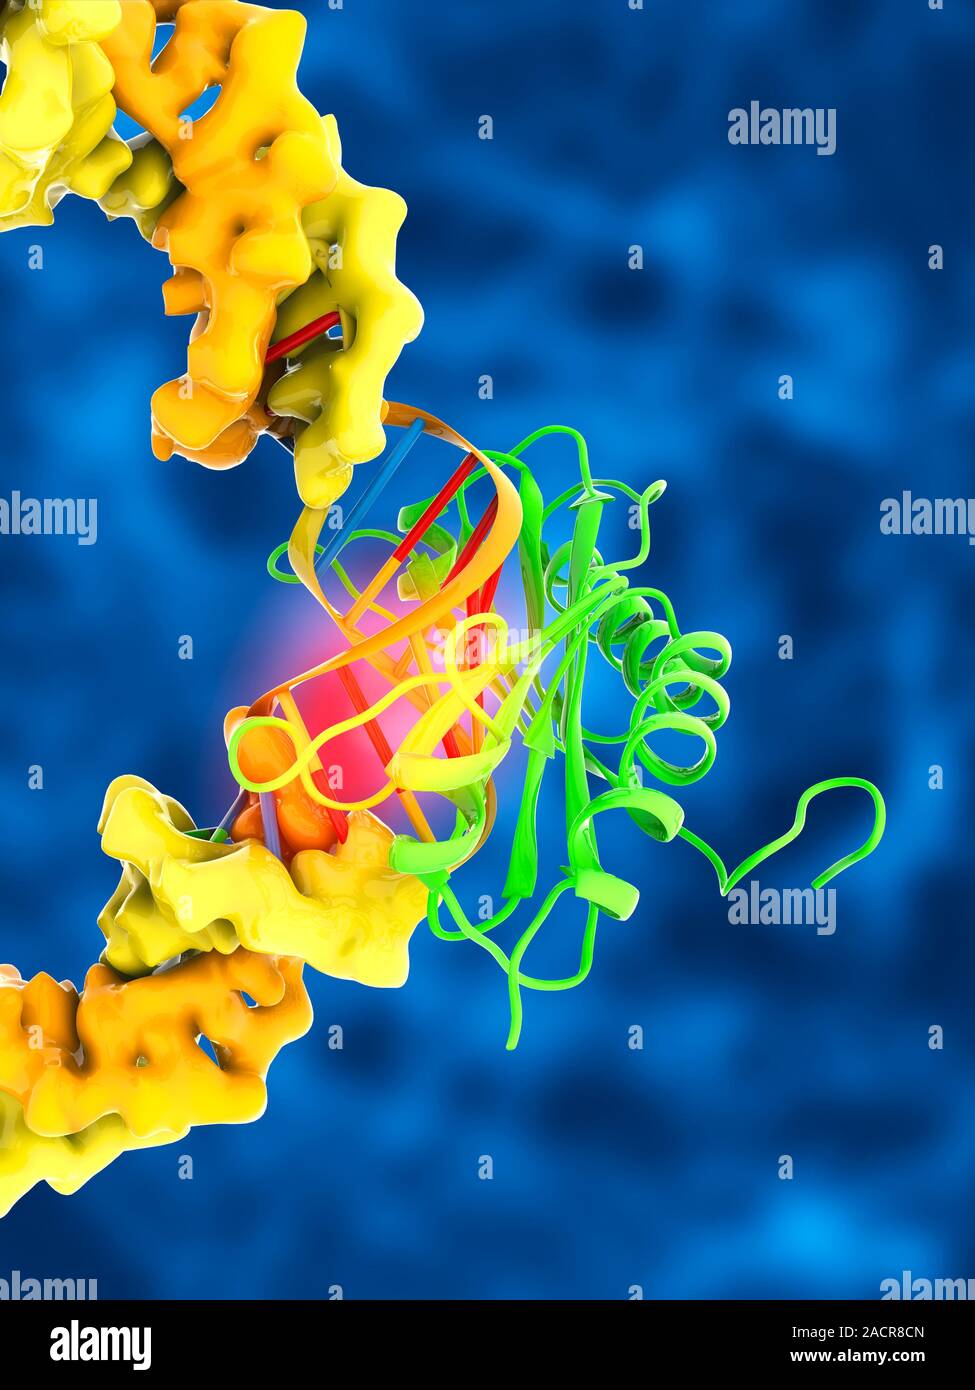 TATA box-binding protein complex. Molecular model showing a TATA box-binding protein (TBP, green) complexed with a strand of DNA (deoxyribonucleic aci Stock Photo